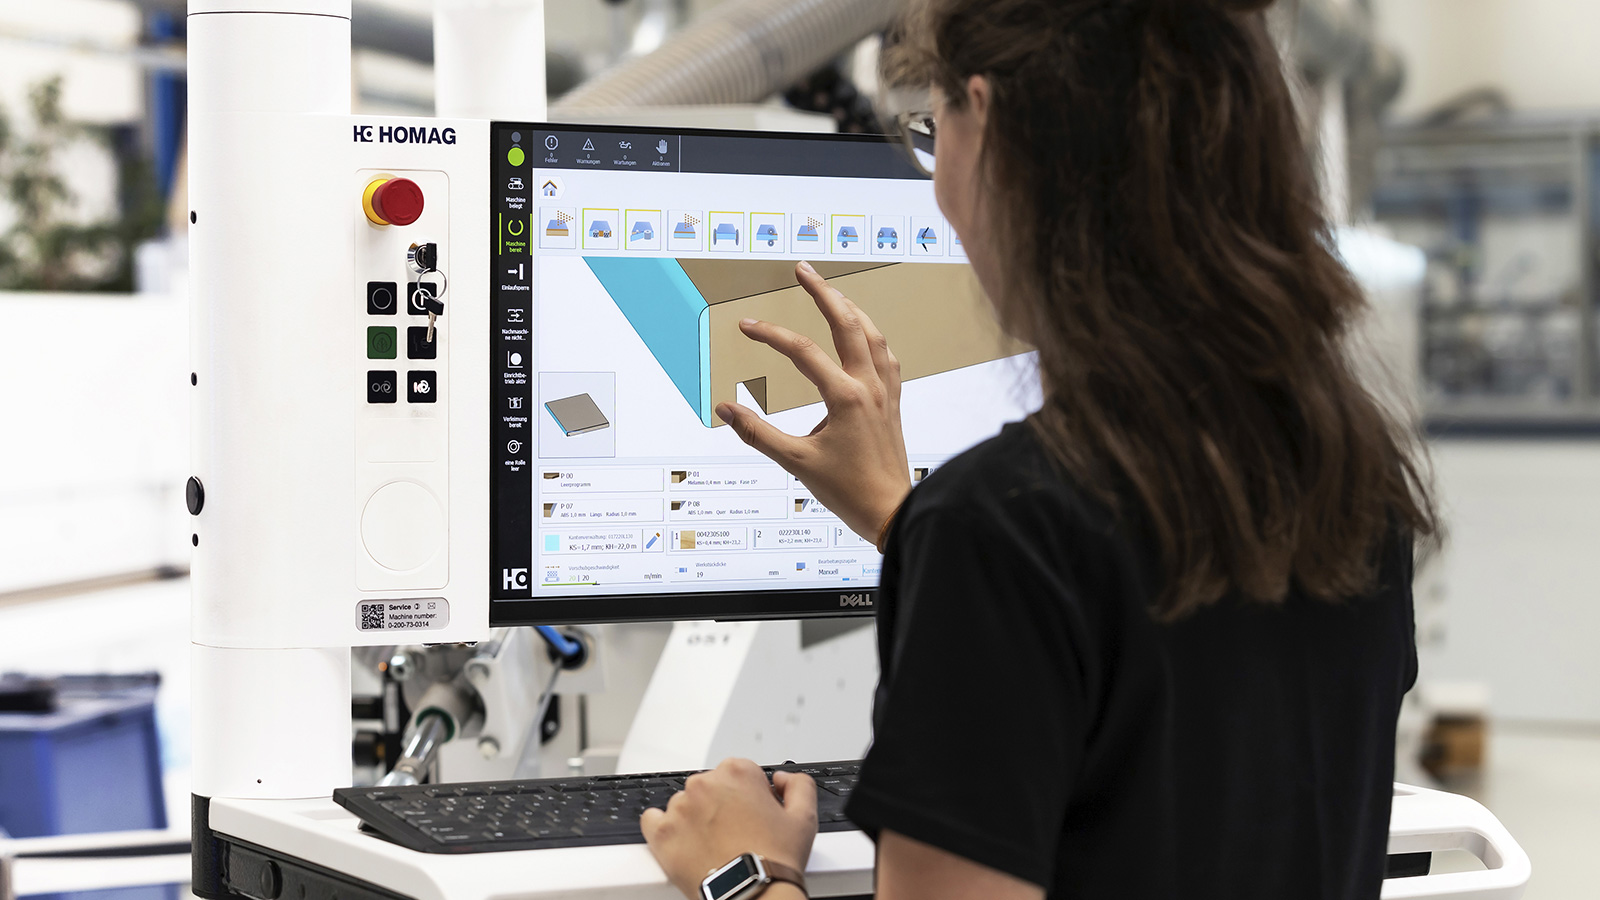 One of the latest innovations from HOMAG is woodCommander 5 the new software generation. Since 2022, it has been used additionally to establish direct connections to the edge band management